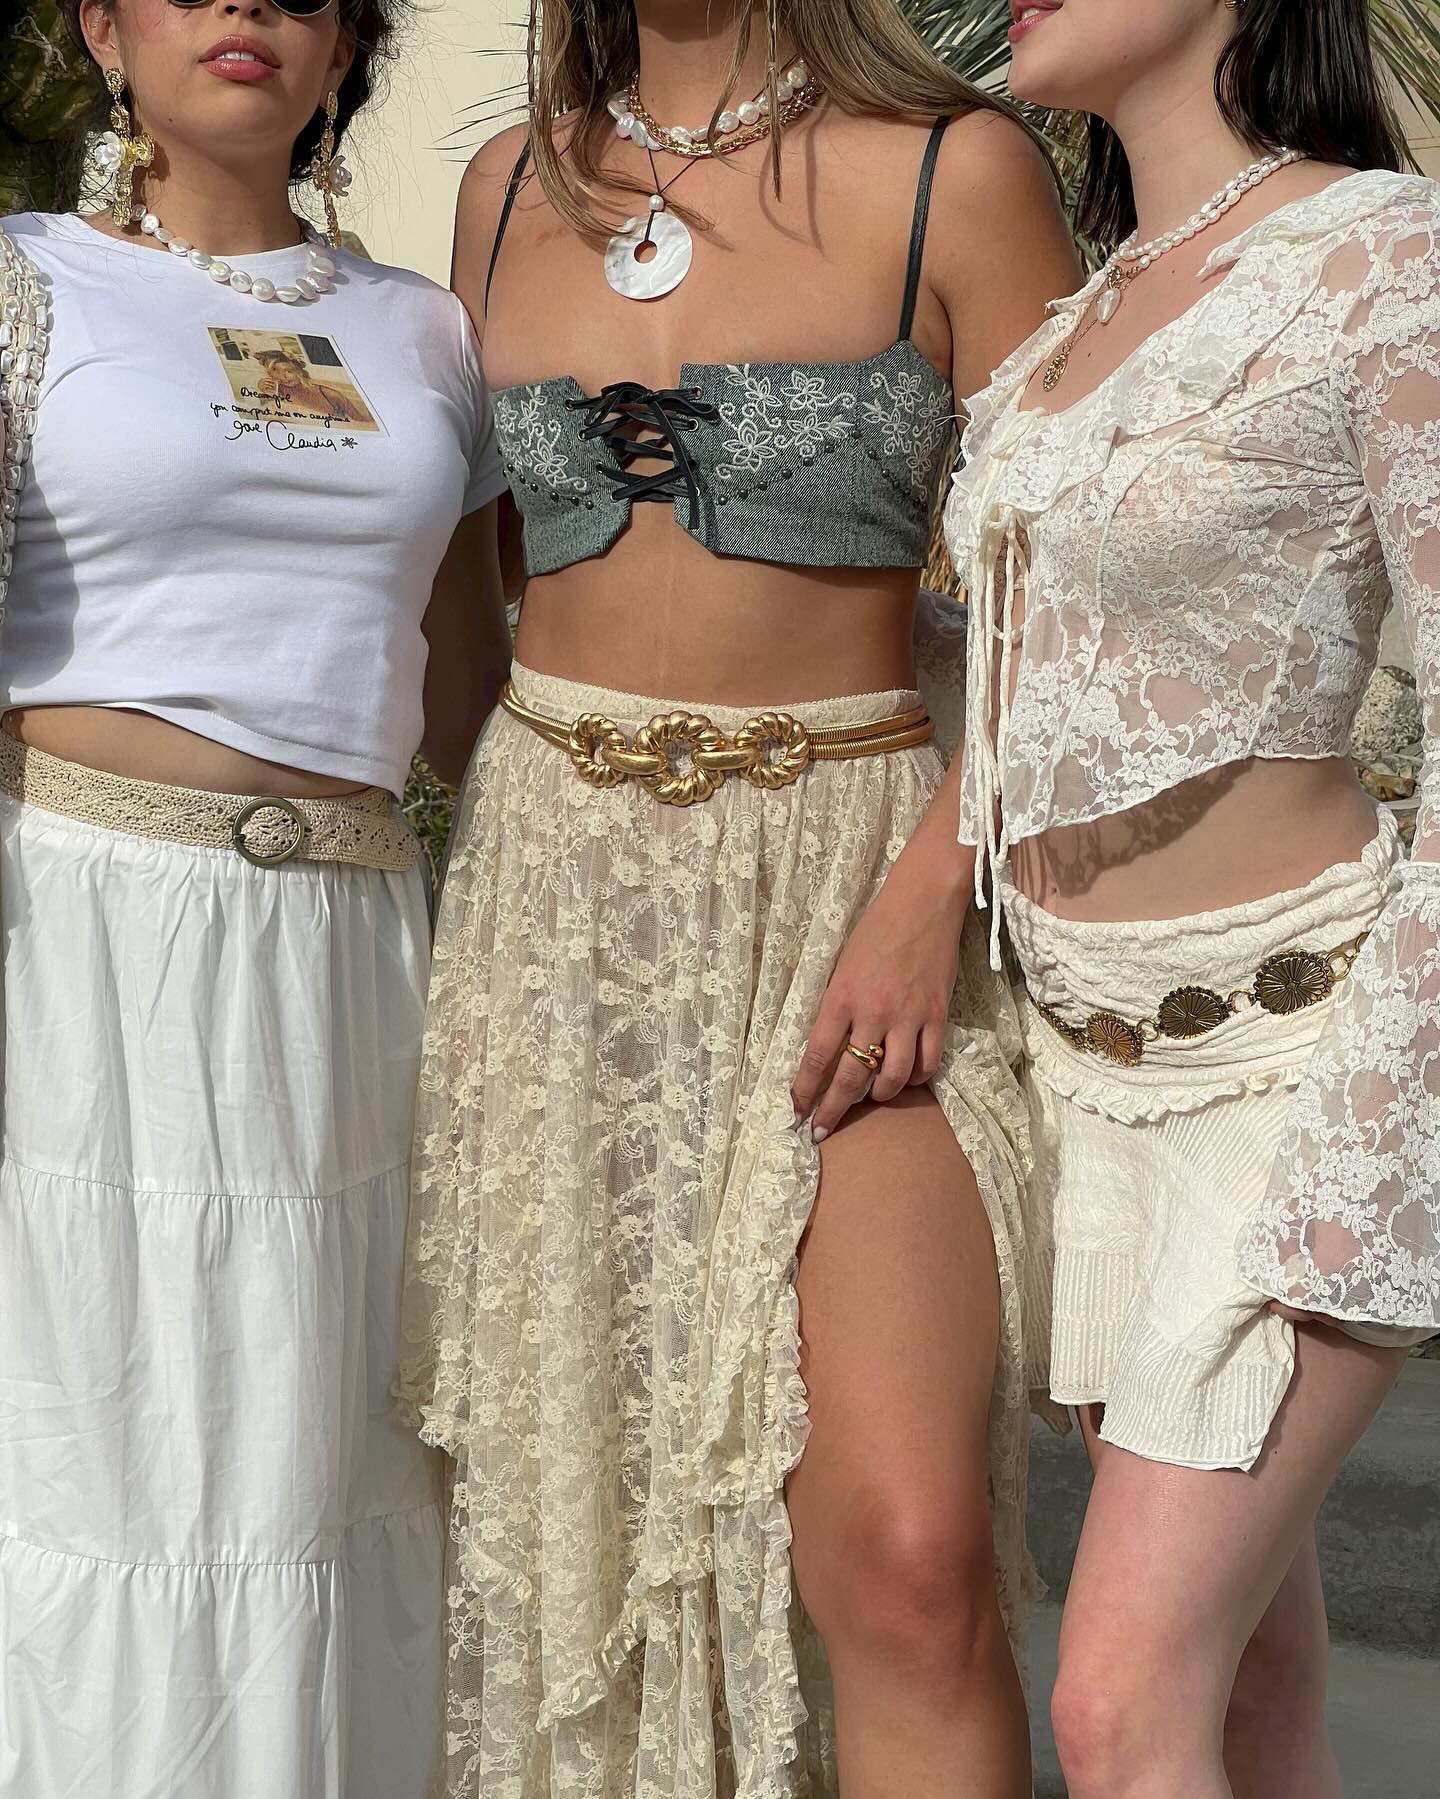 Infuencers at Coachella, three woman wearing white and cream outfits.